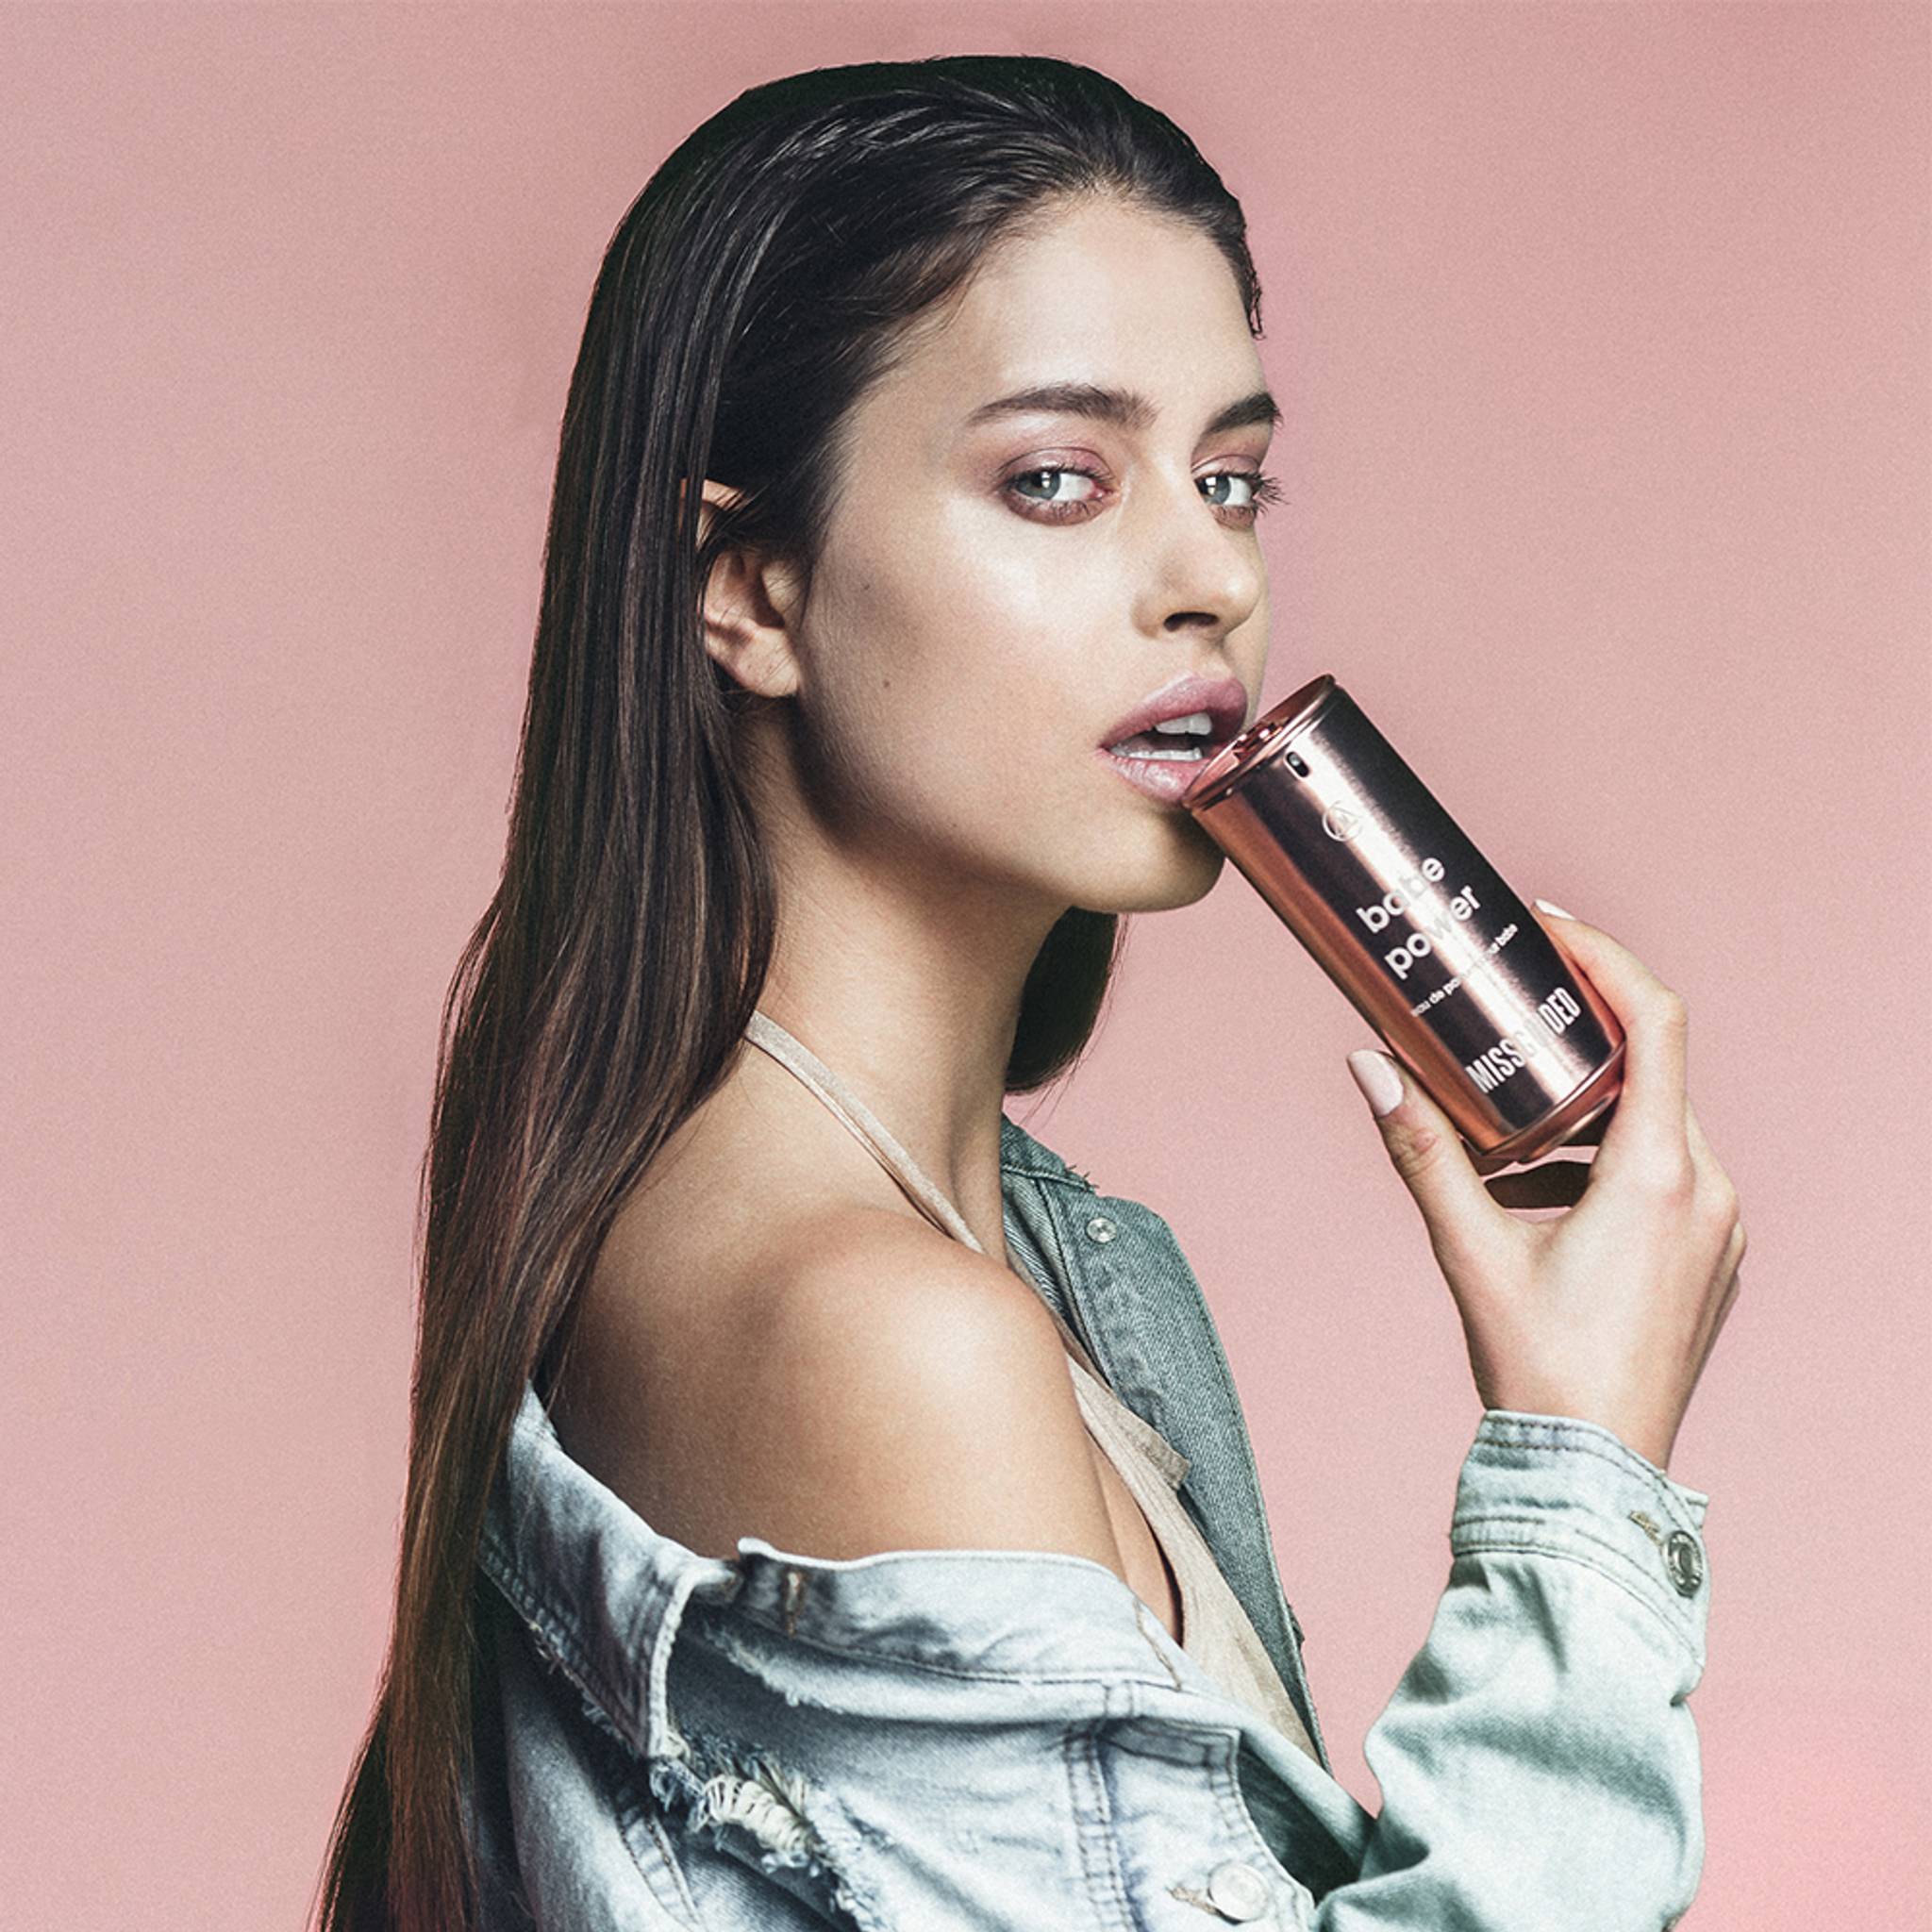 Missguided’s affordable perfume is a bestseller